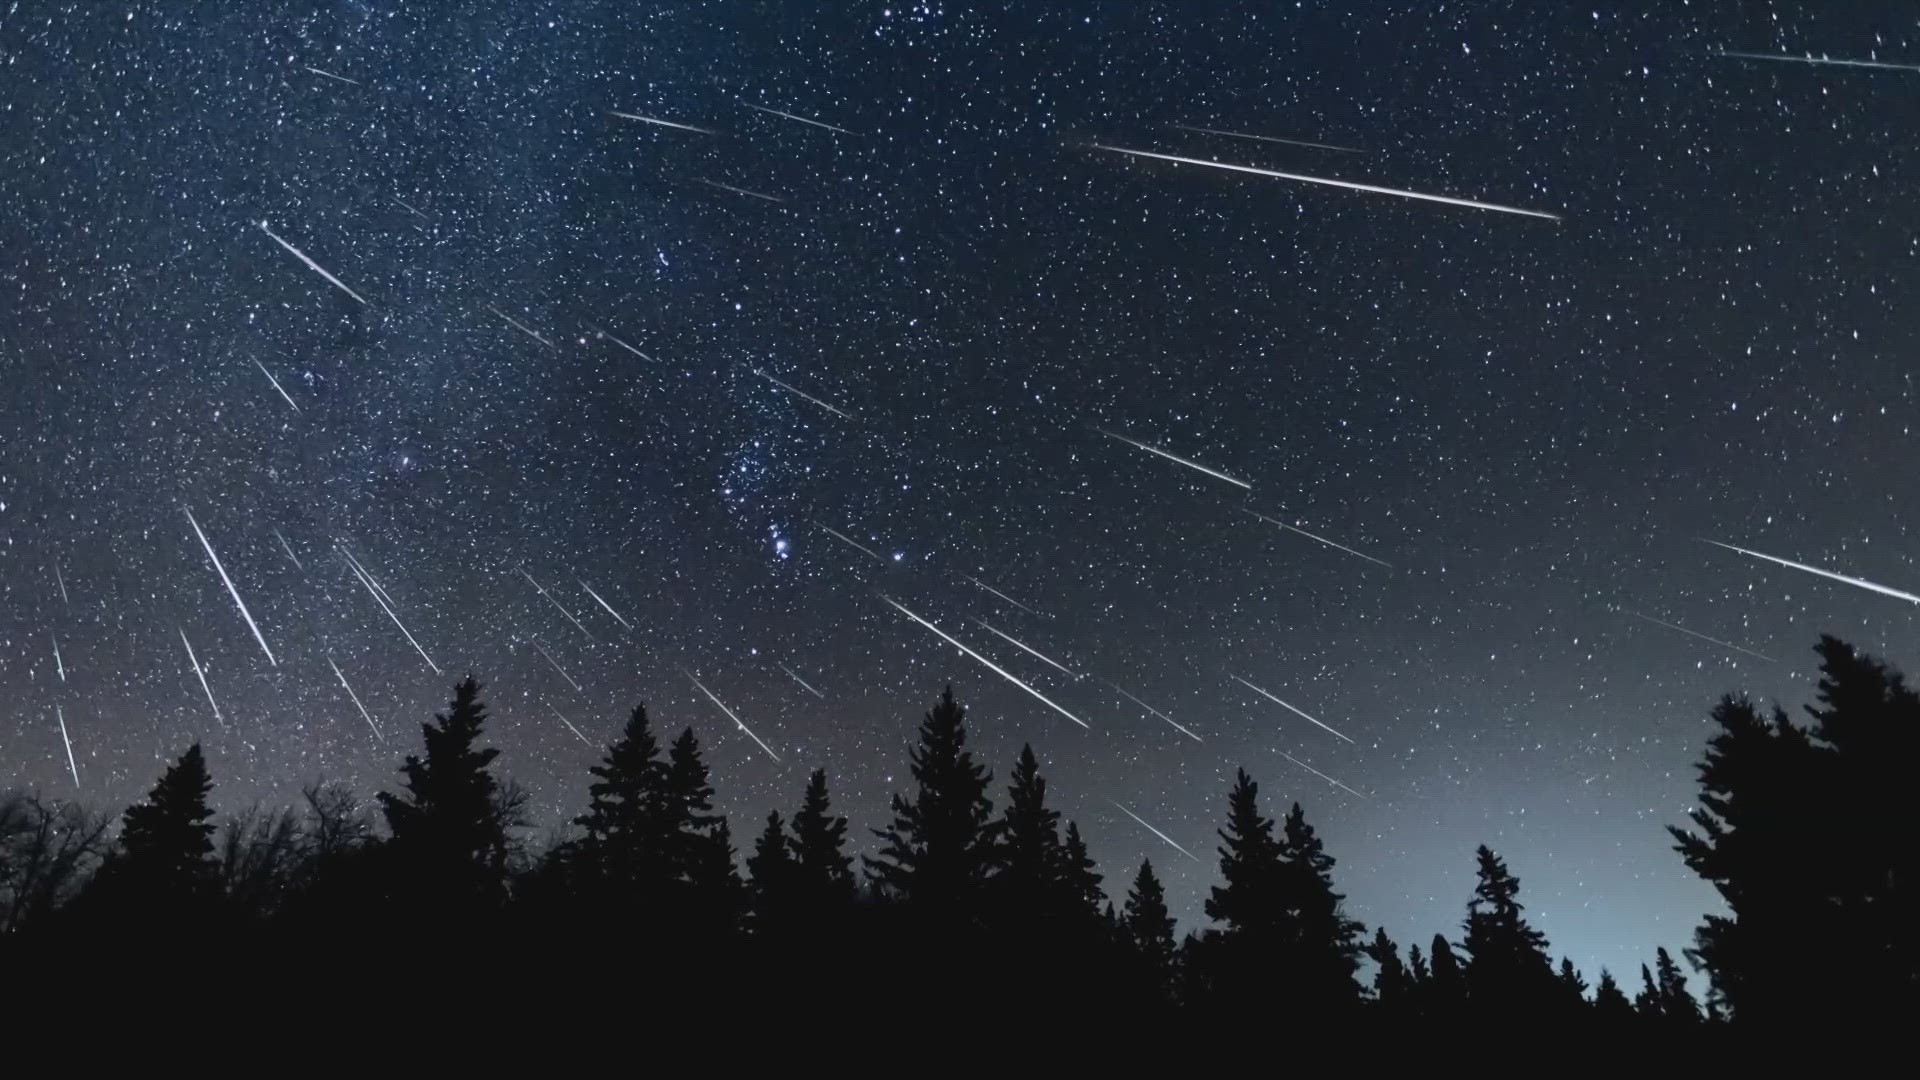 The Geminids can often be disrupted by snowstorms and frigid sub-zero cold as they peak in mid-December, but conditions look favorable for viewing this year.